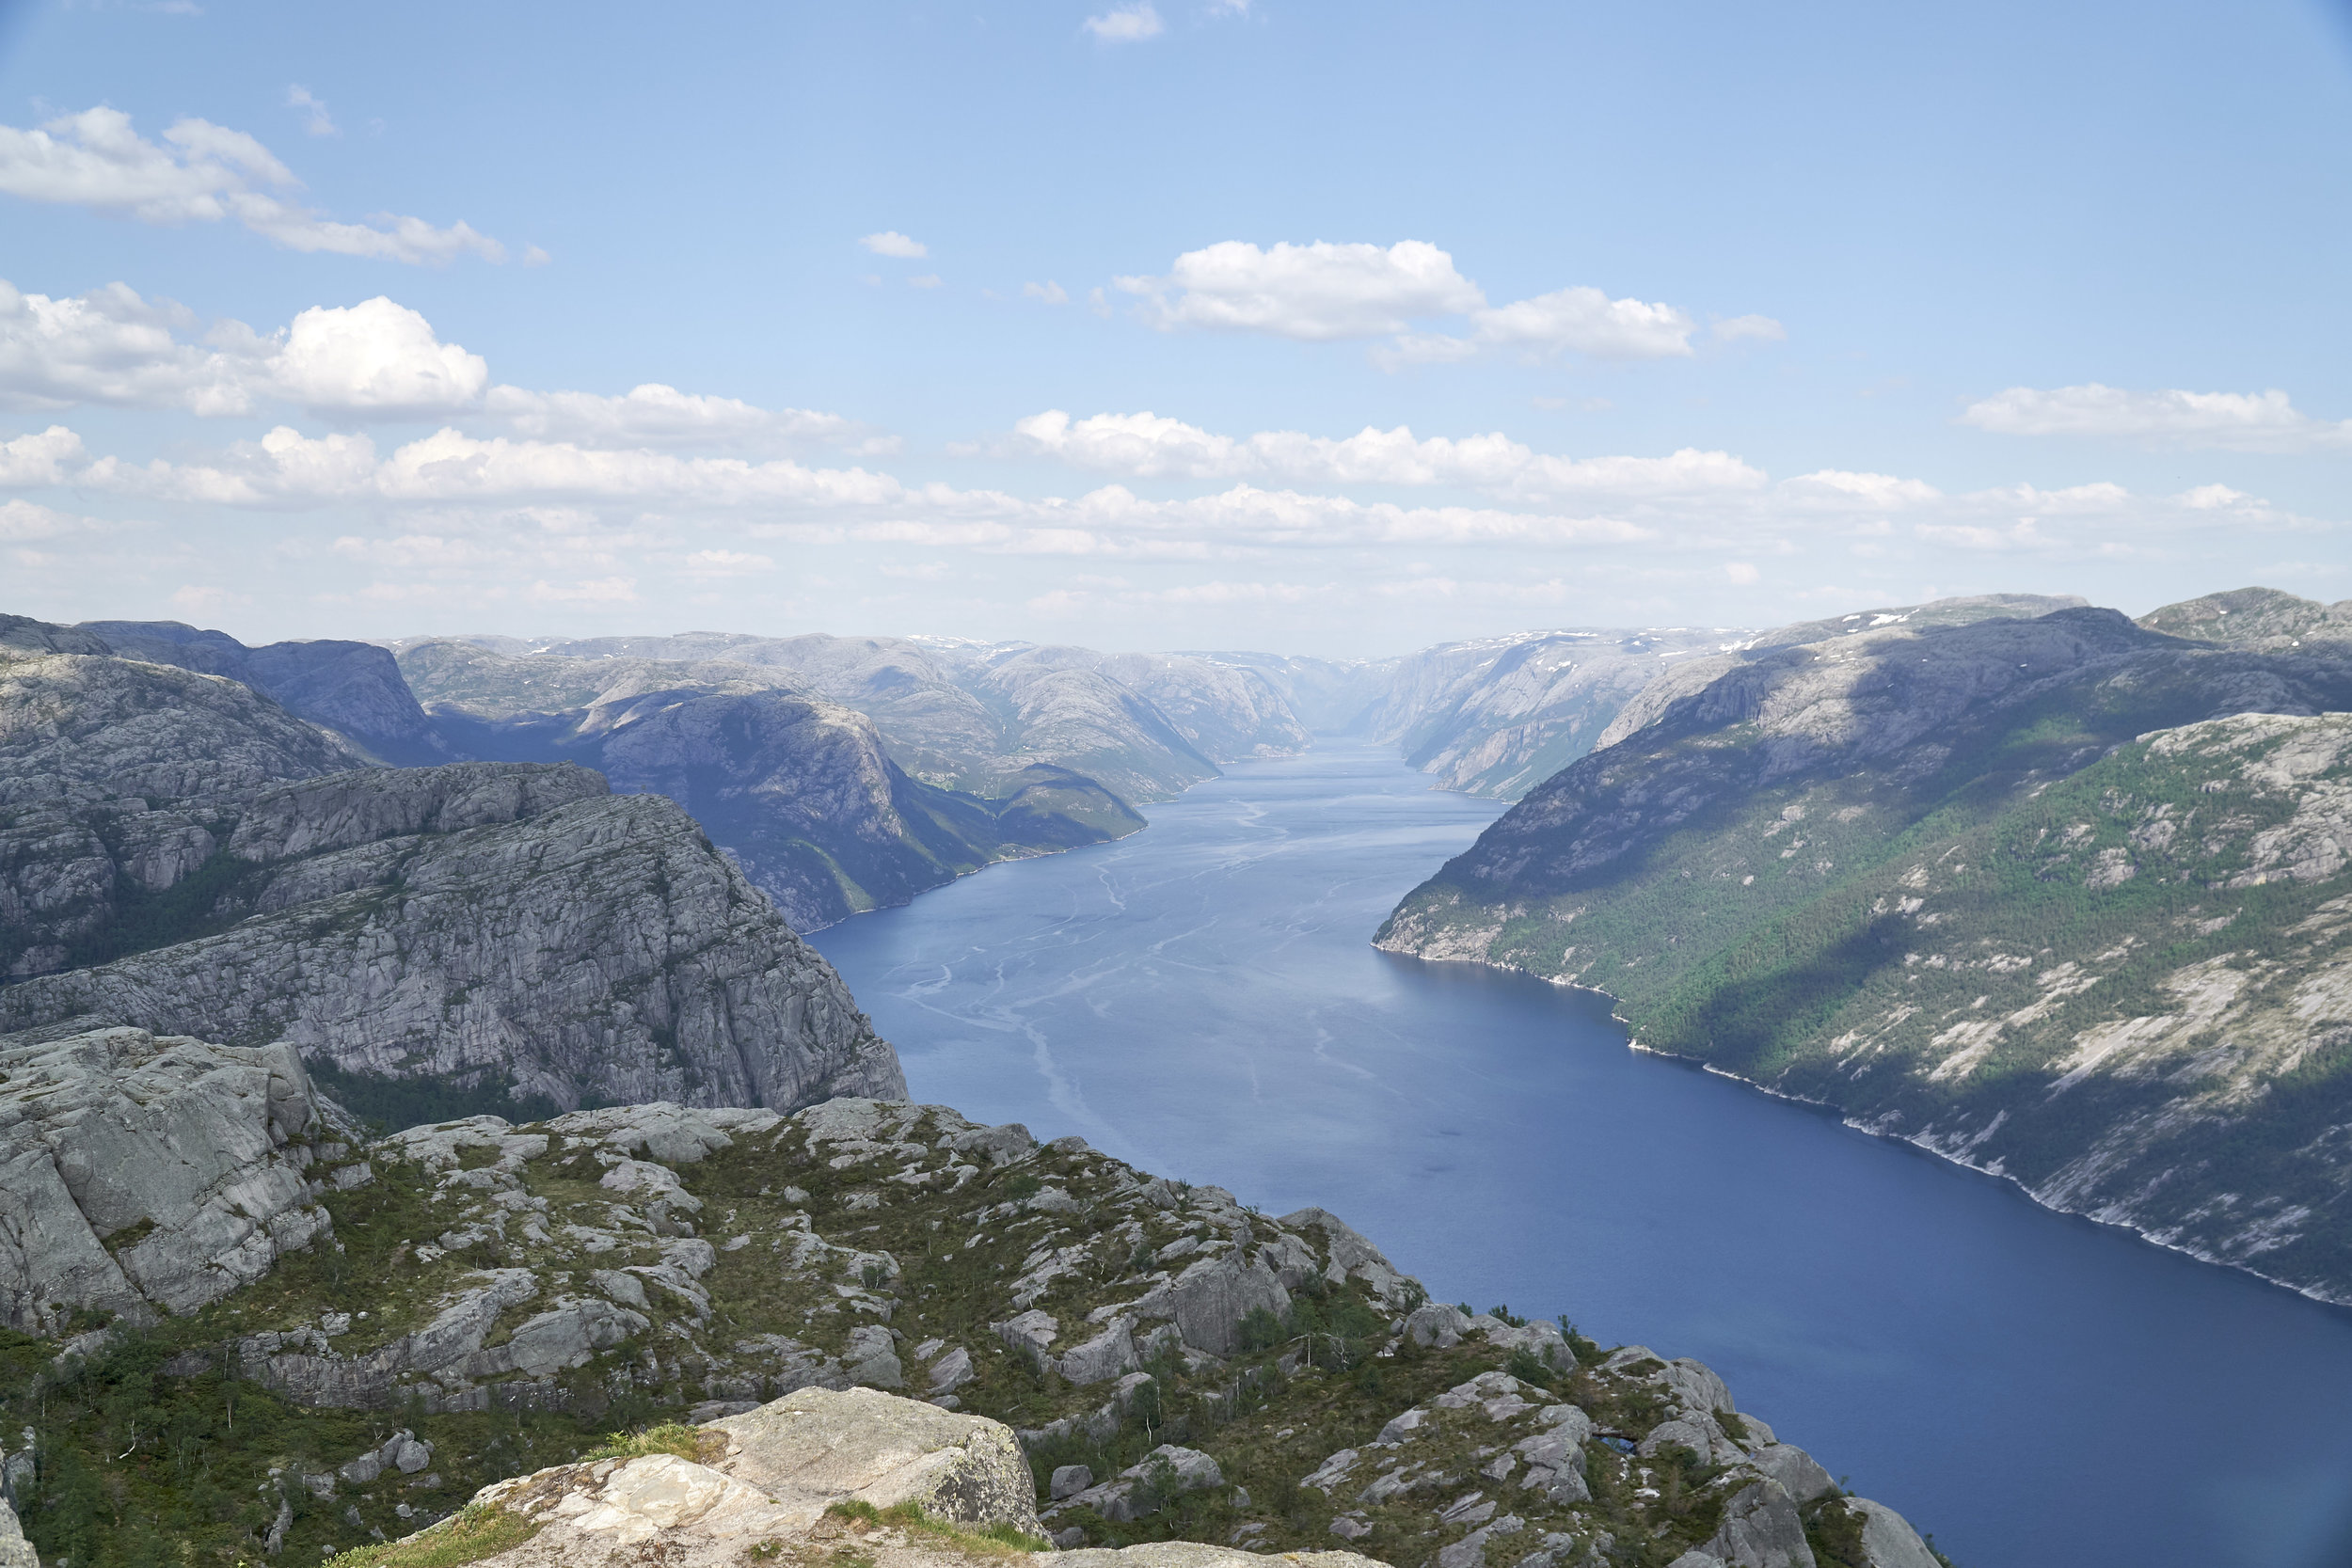  View from above Pulpit Rock, looking down the fjord. 